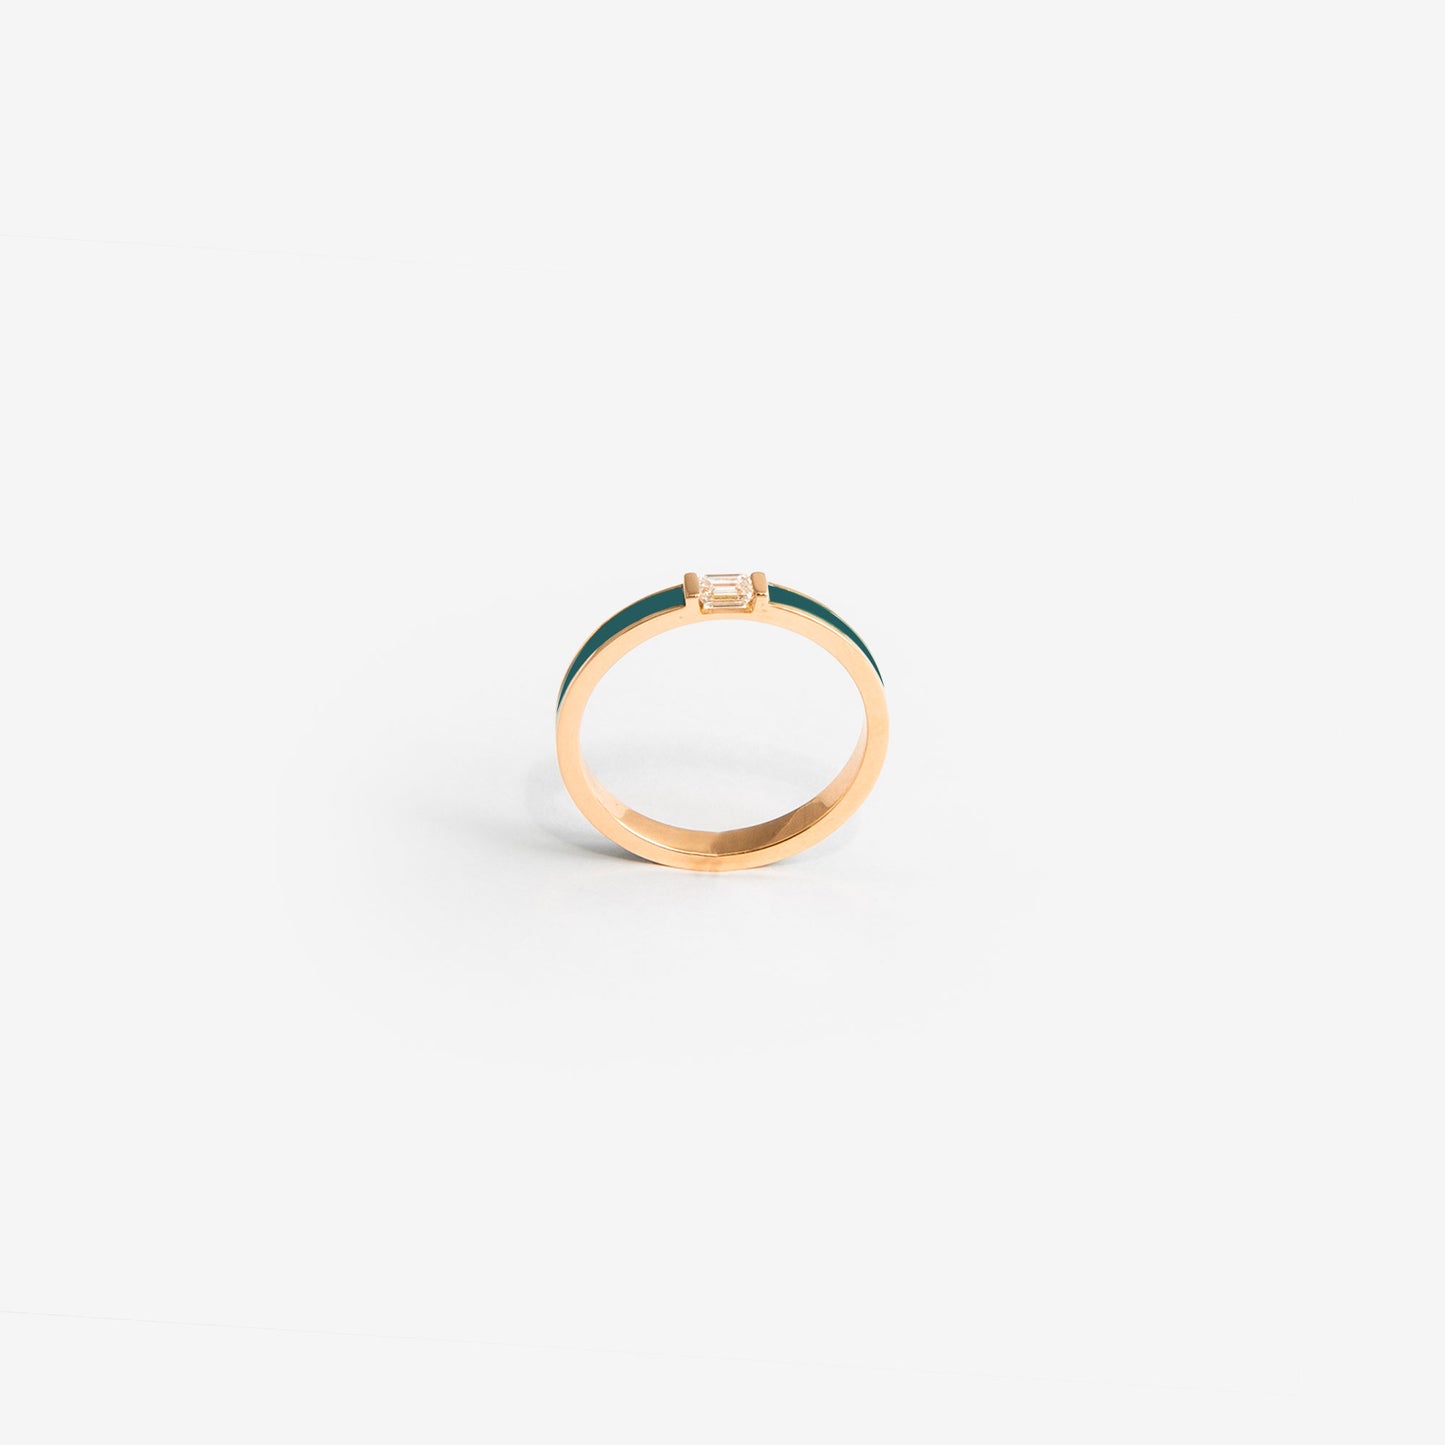 Rose gold band ring  with petroleum blue enamel and diamond